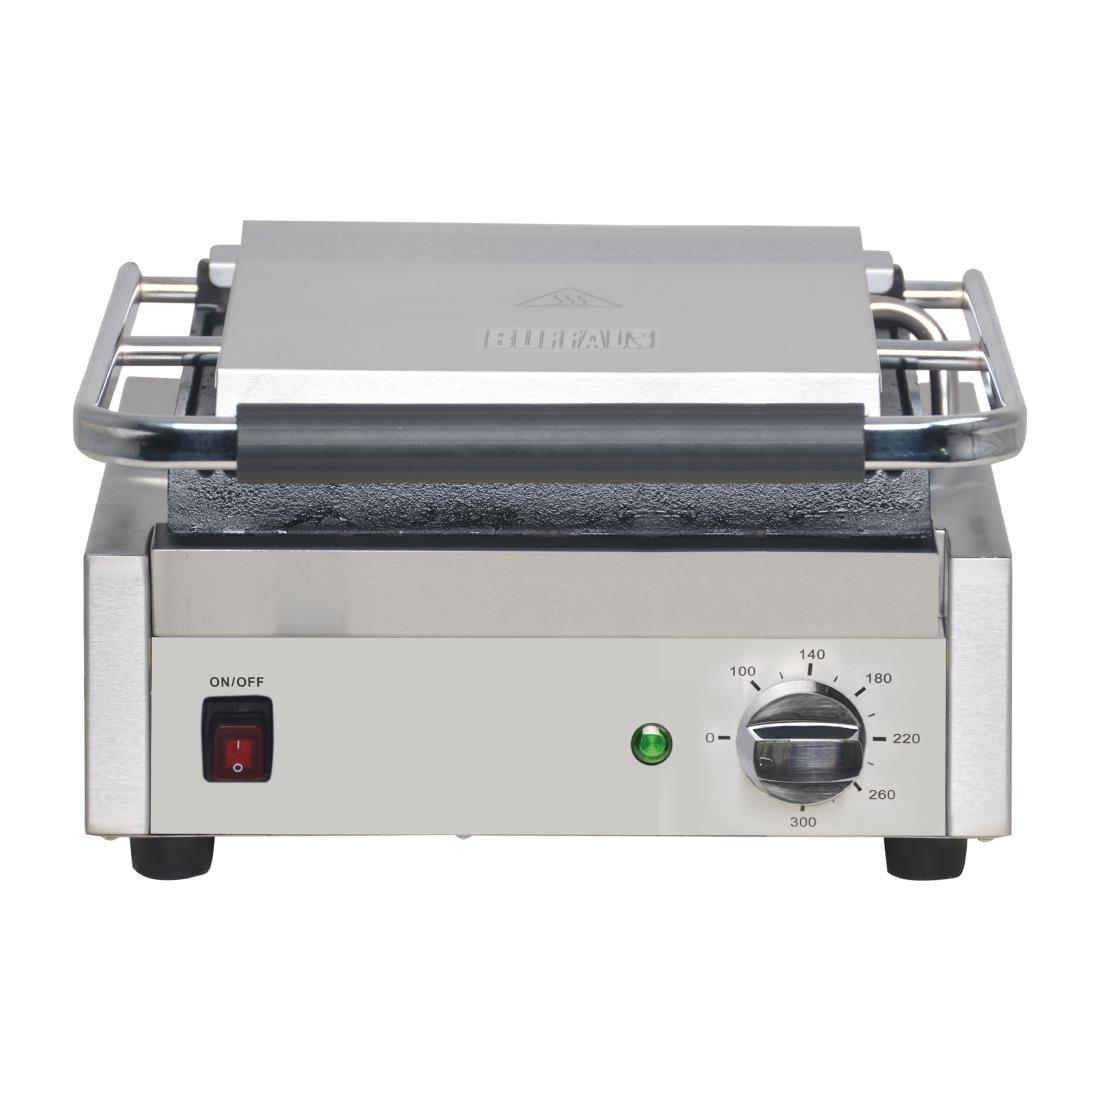 Buffalo Bistro Large Contact Grill - DY997  - 1